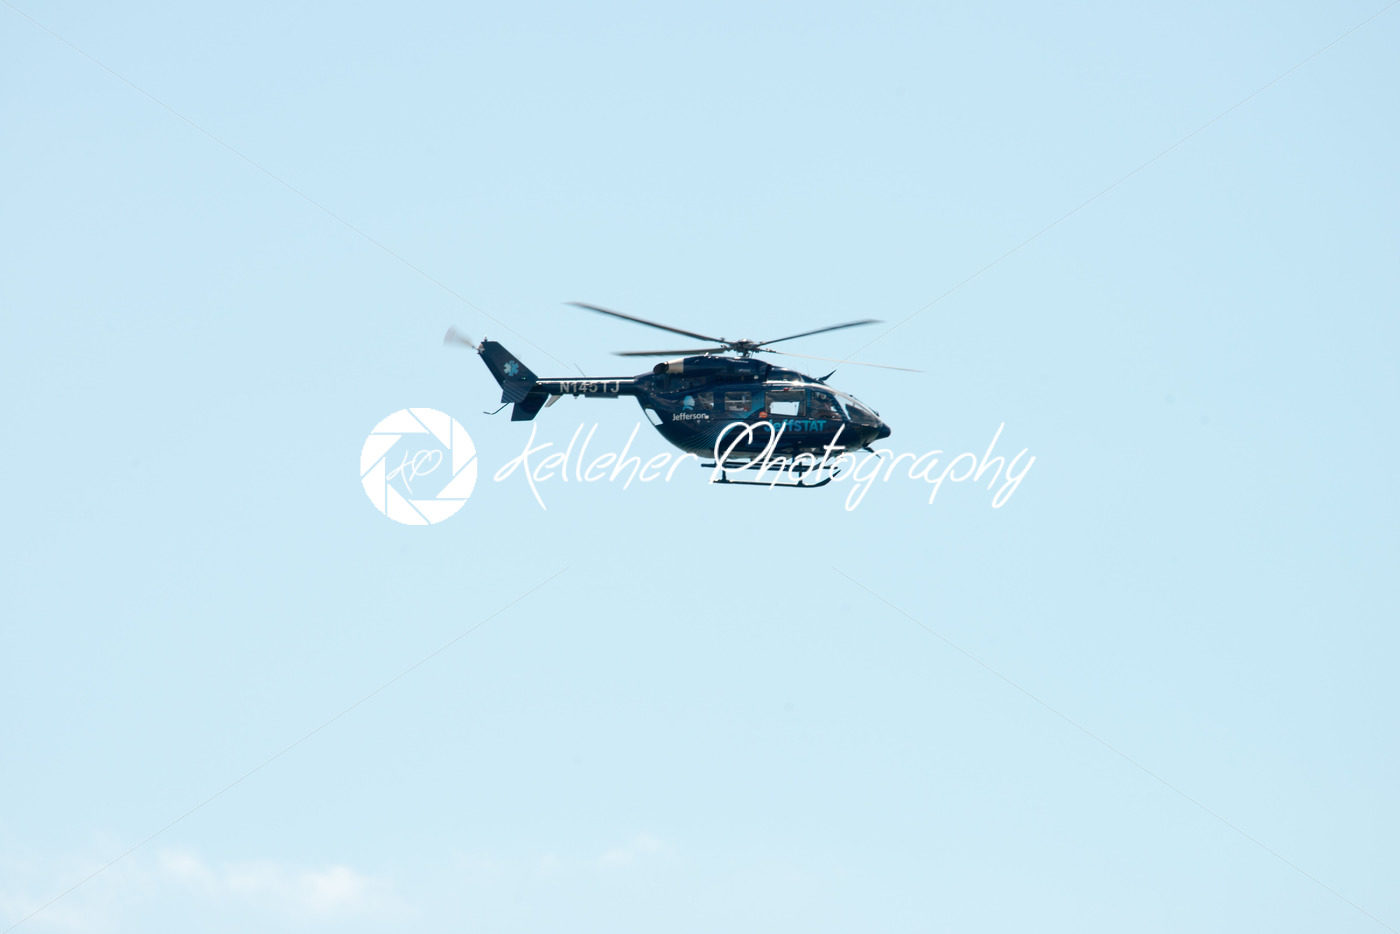 ATLANTIC CITY, NJ – AUGUST 17: Jeffstat Helicopter at Annual Atlantic City Air Show on August 17, 2016 - Kelleher Photography Store